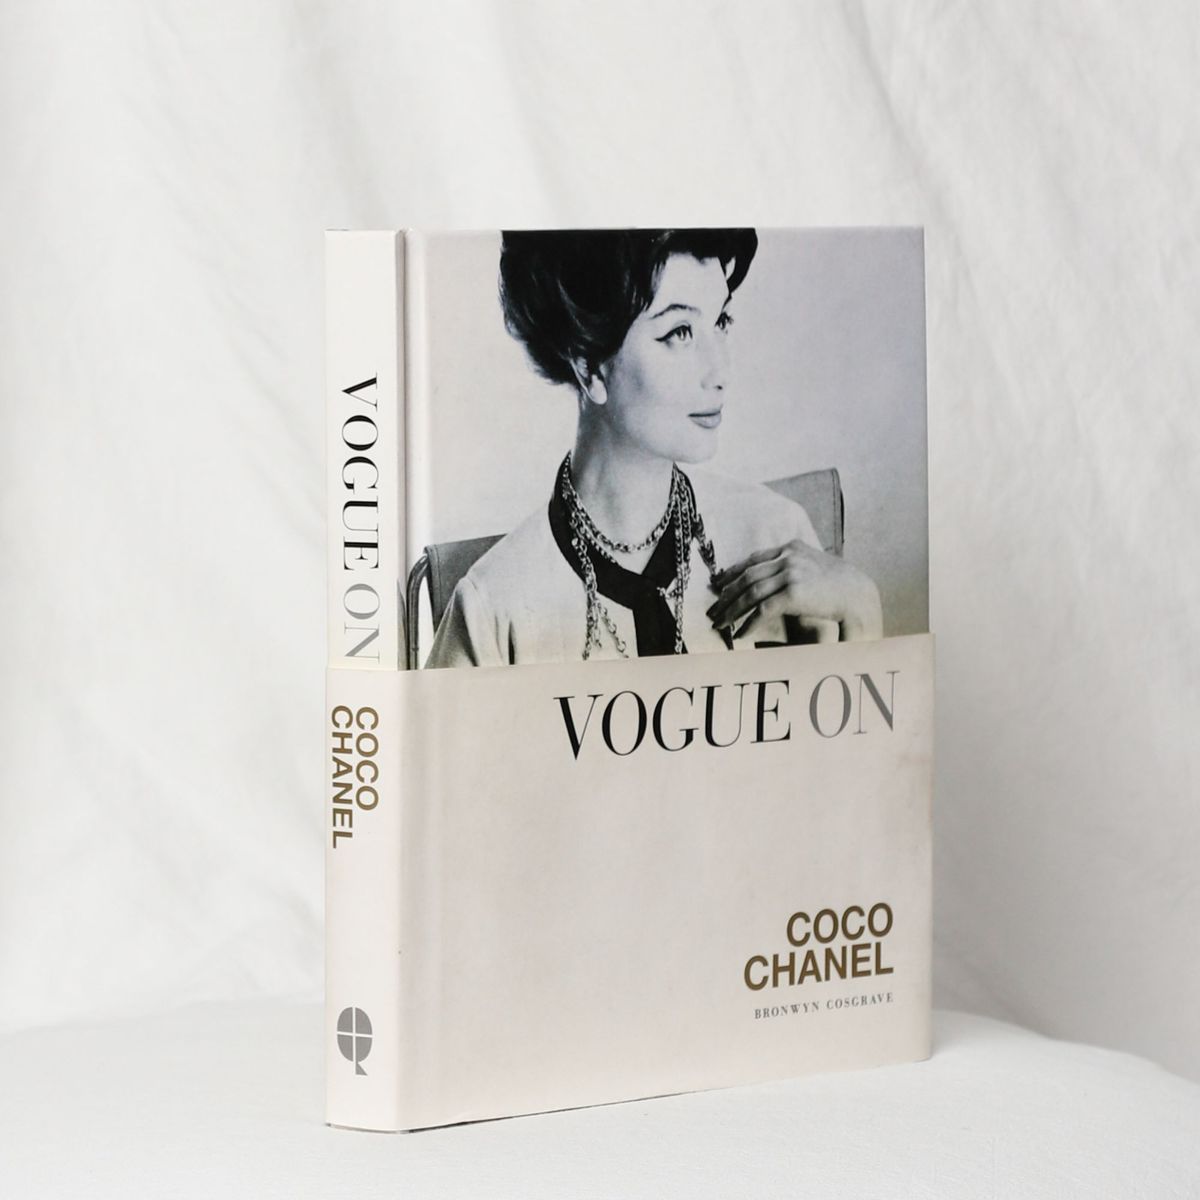 Books & Magazines, Vogue on Coco Chanel Book By Bronwyn C